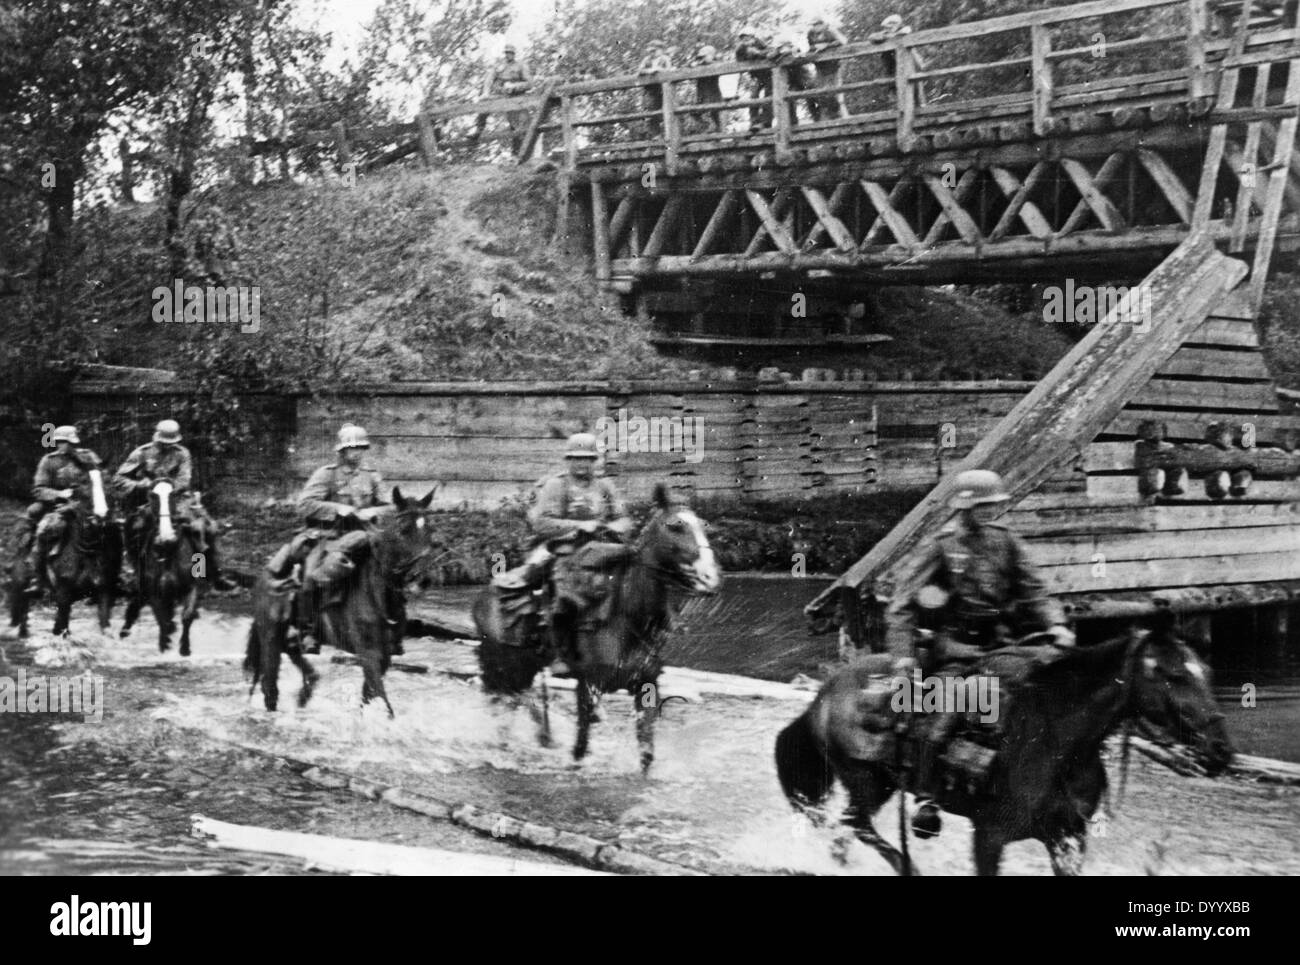 German troops,1939, German cavalry in Poland, 1939 Stock Photo